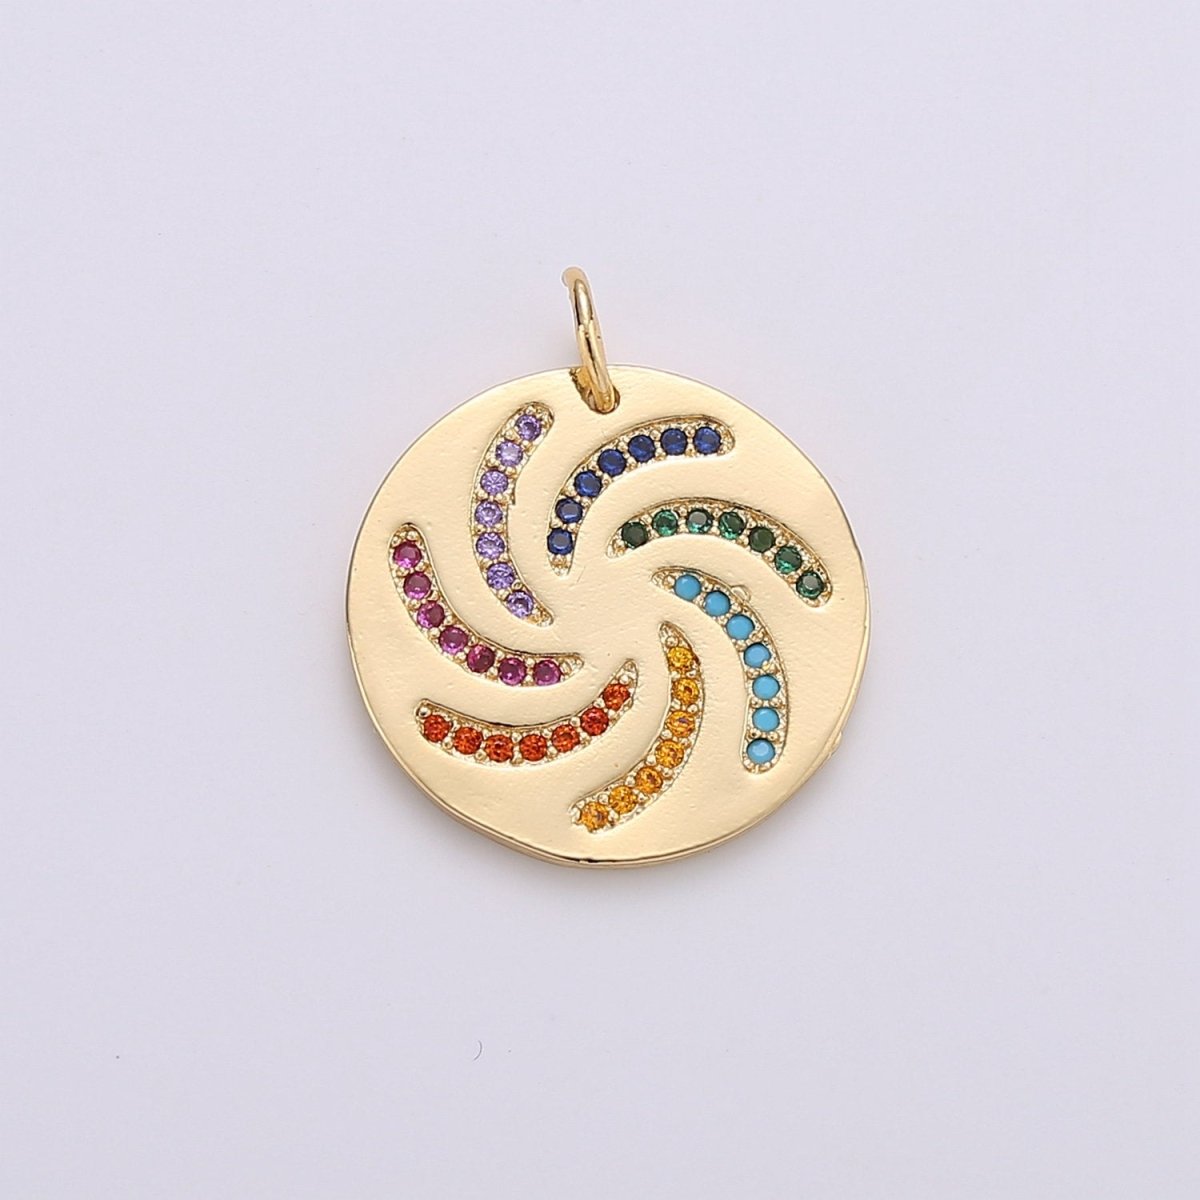 Dainty Rainbow Charm, Multi Color Charm Micro Pave Cz Pendant Disc Charm in Gold Filled, C-567 - DLUXCA